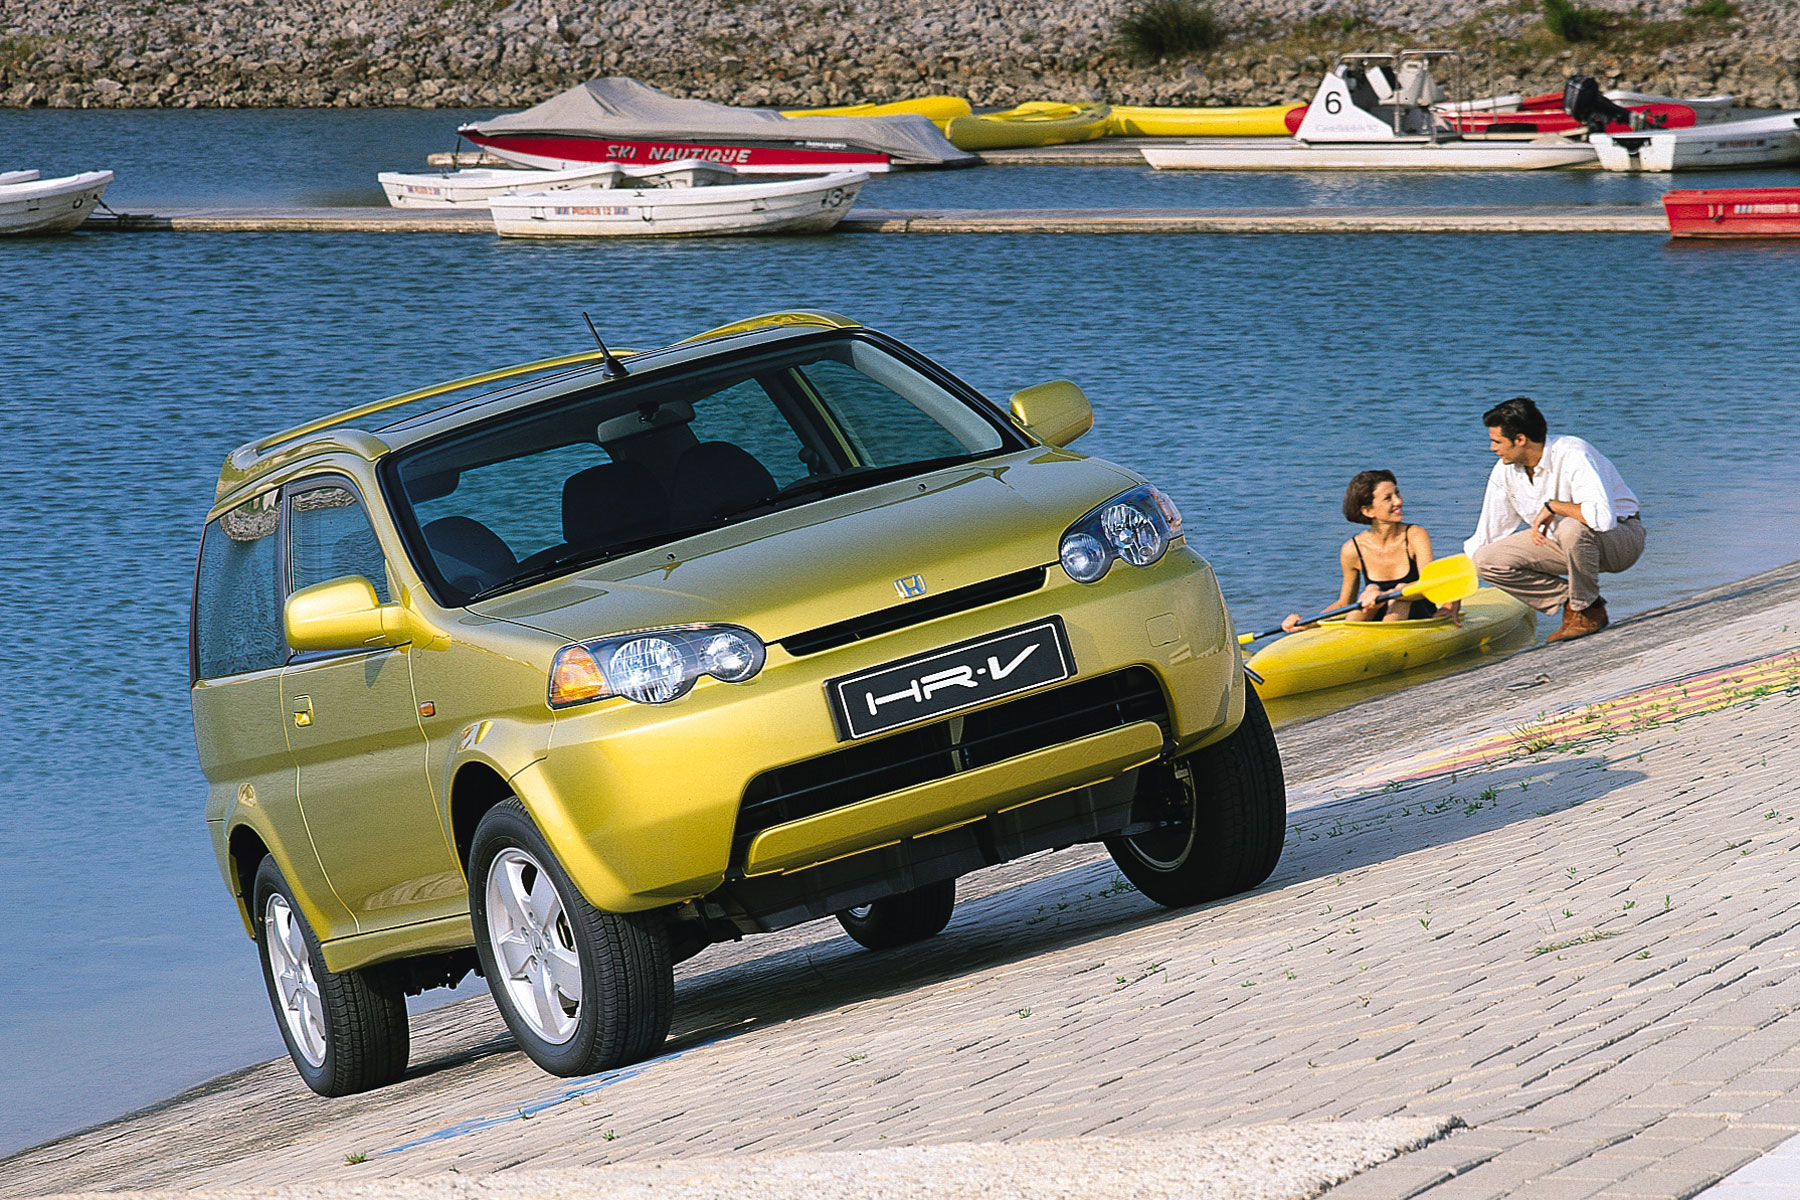 10 crossovers that beat the Nissan Qashqai to market